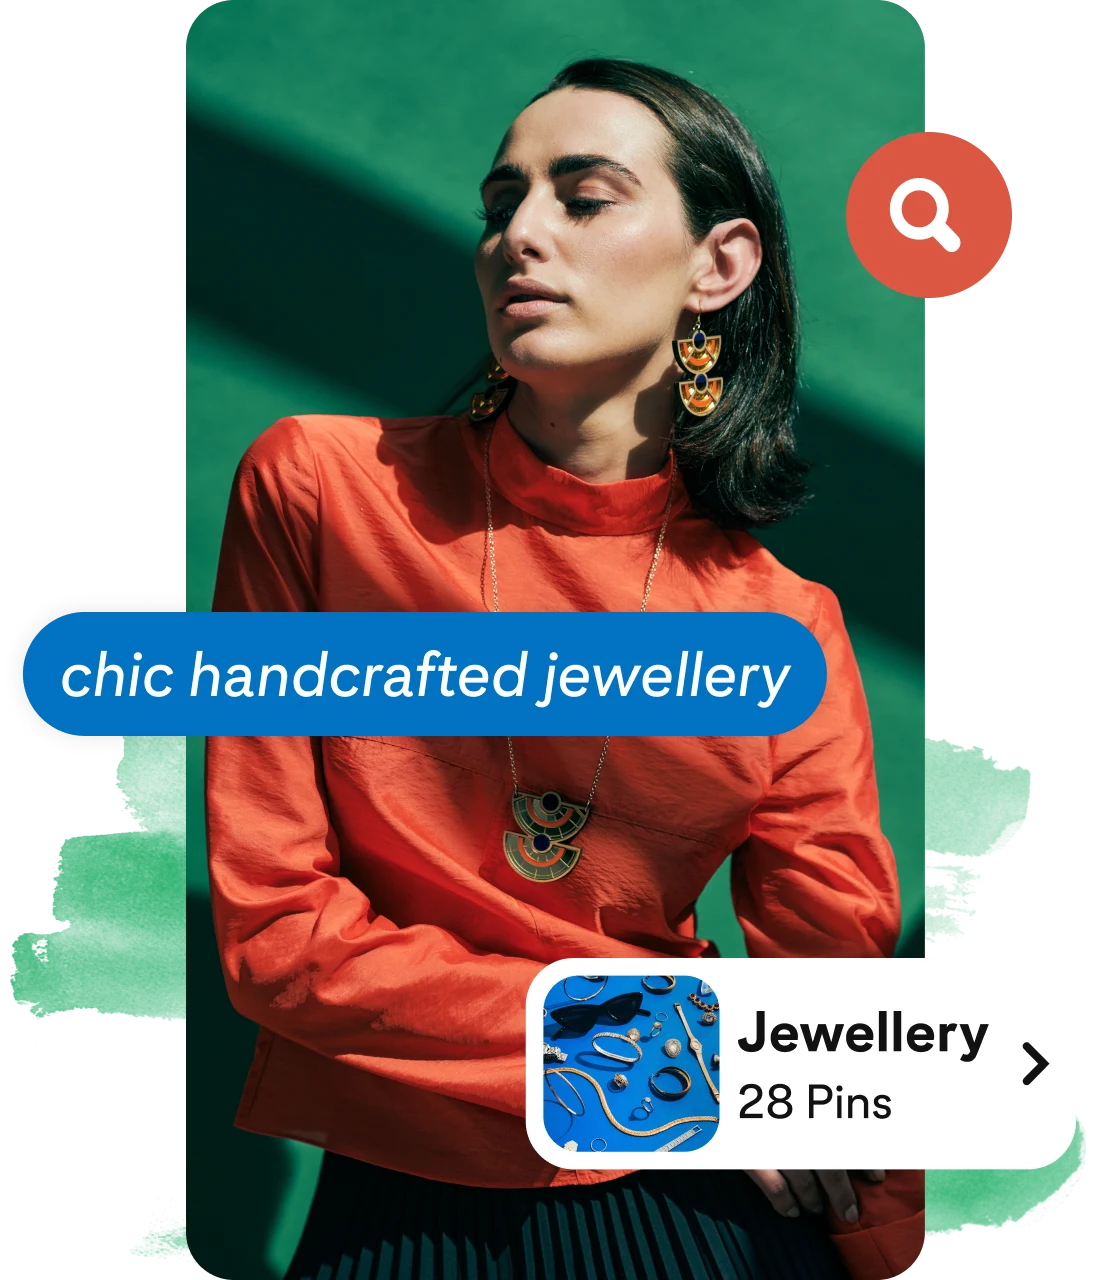 Collage of a woman wearing an orange blouse, a blue content button tag, a jewellery board link and a question mark icon